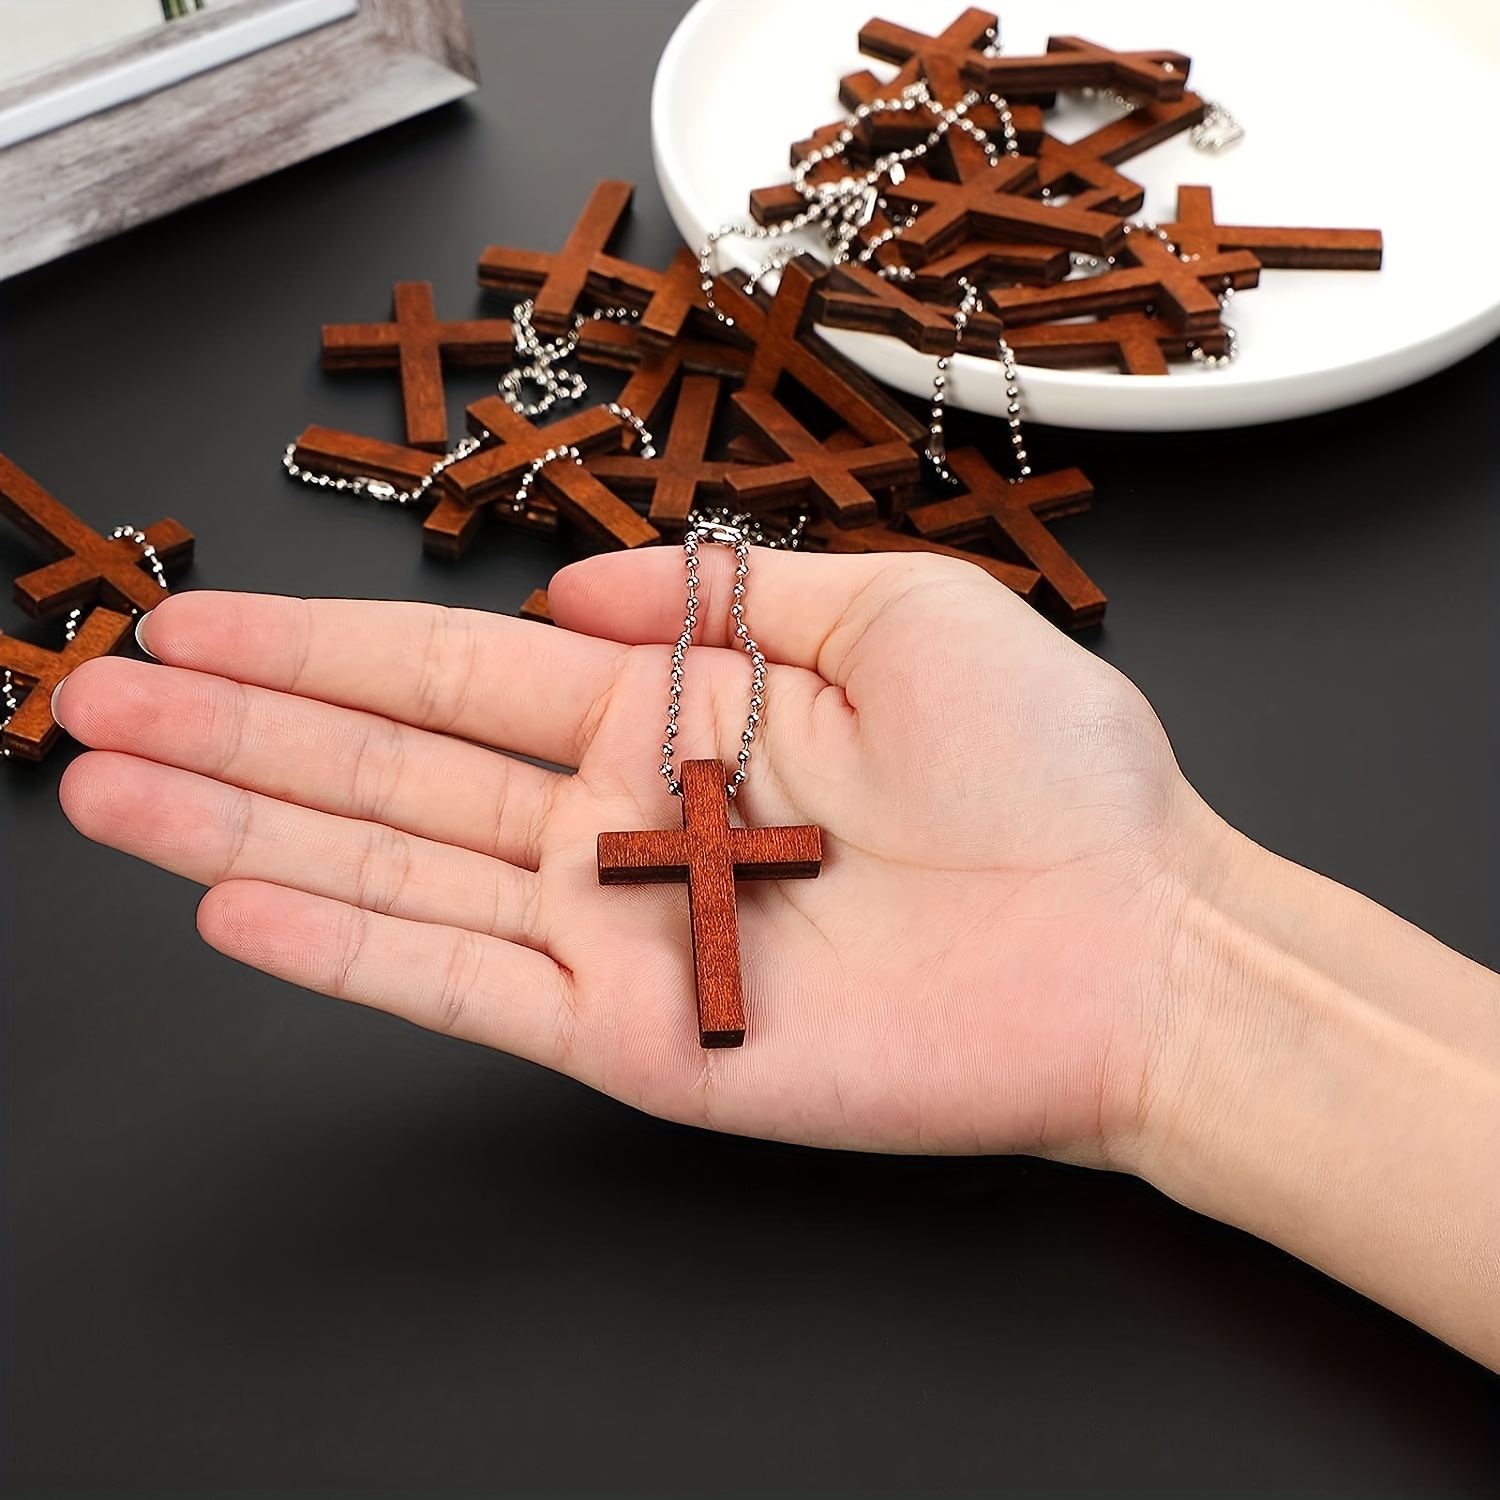 150Pcs/Box Dyed Wood Cross Pendants Wooden Charms Crafts for DIY